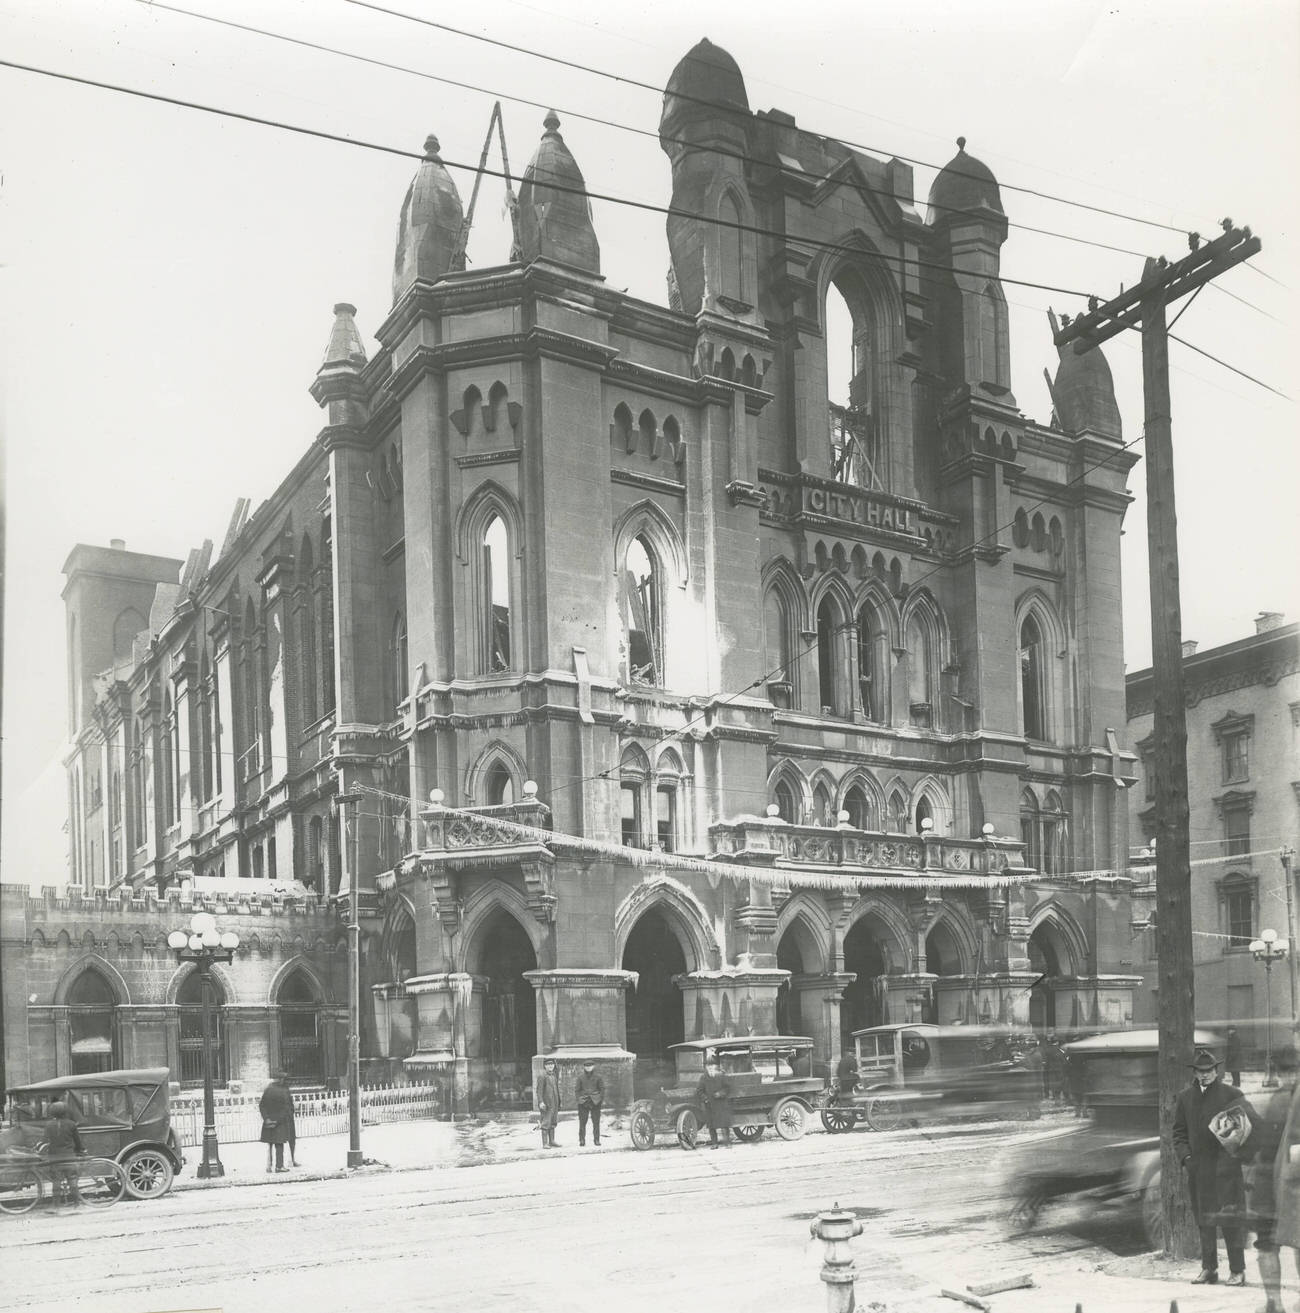 City Hall after the fire, original building opened March 28, 1872, destroyed by fire on January 12, 1921, photo taken January 13, 1921.